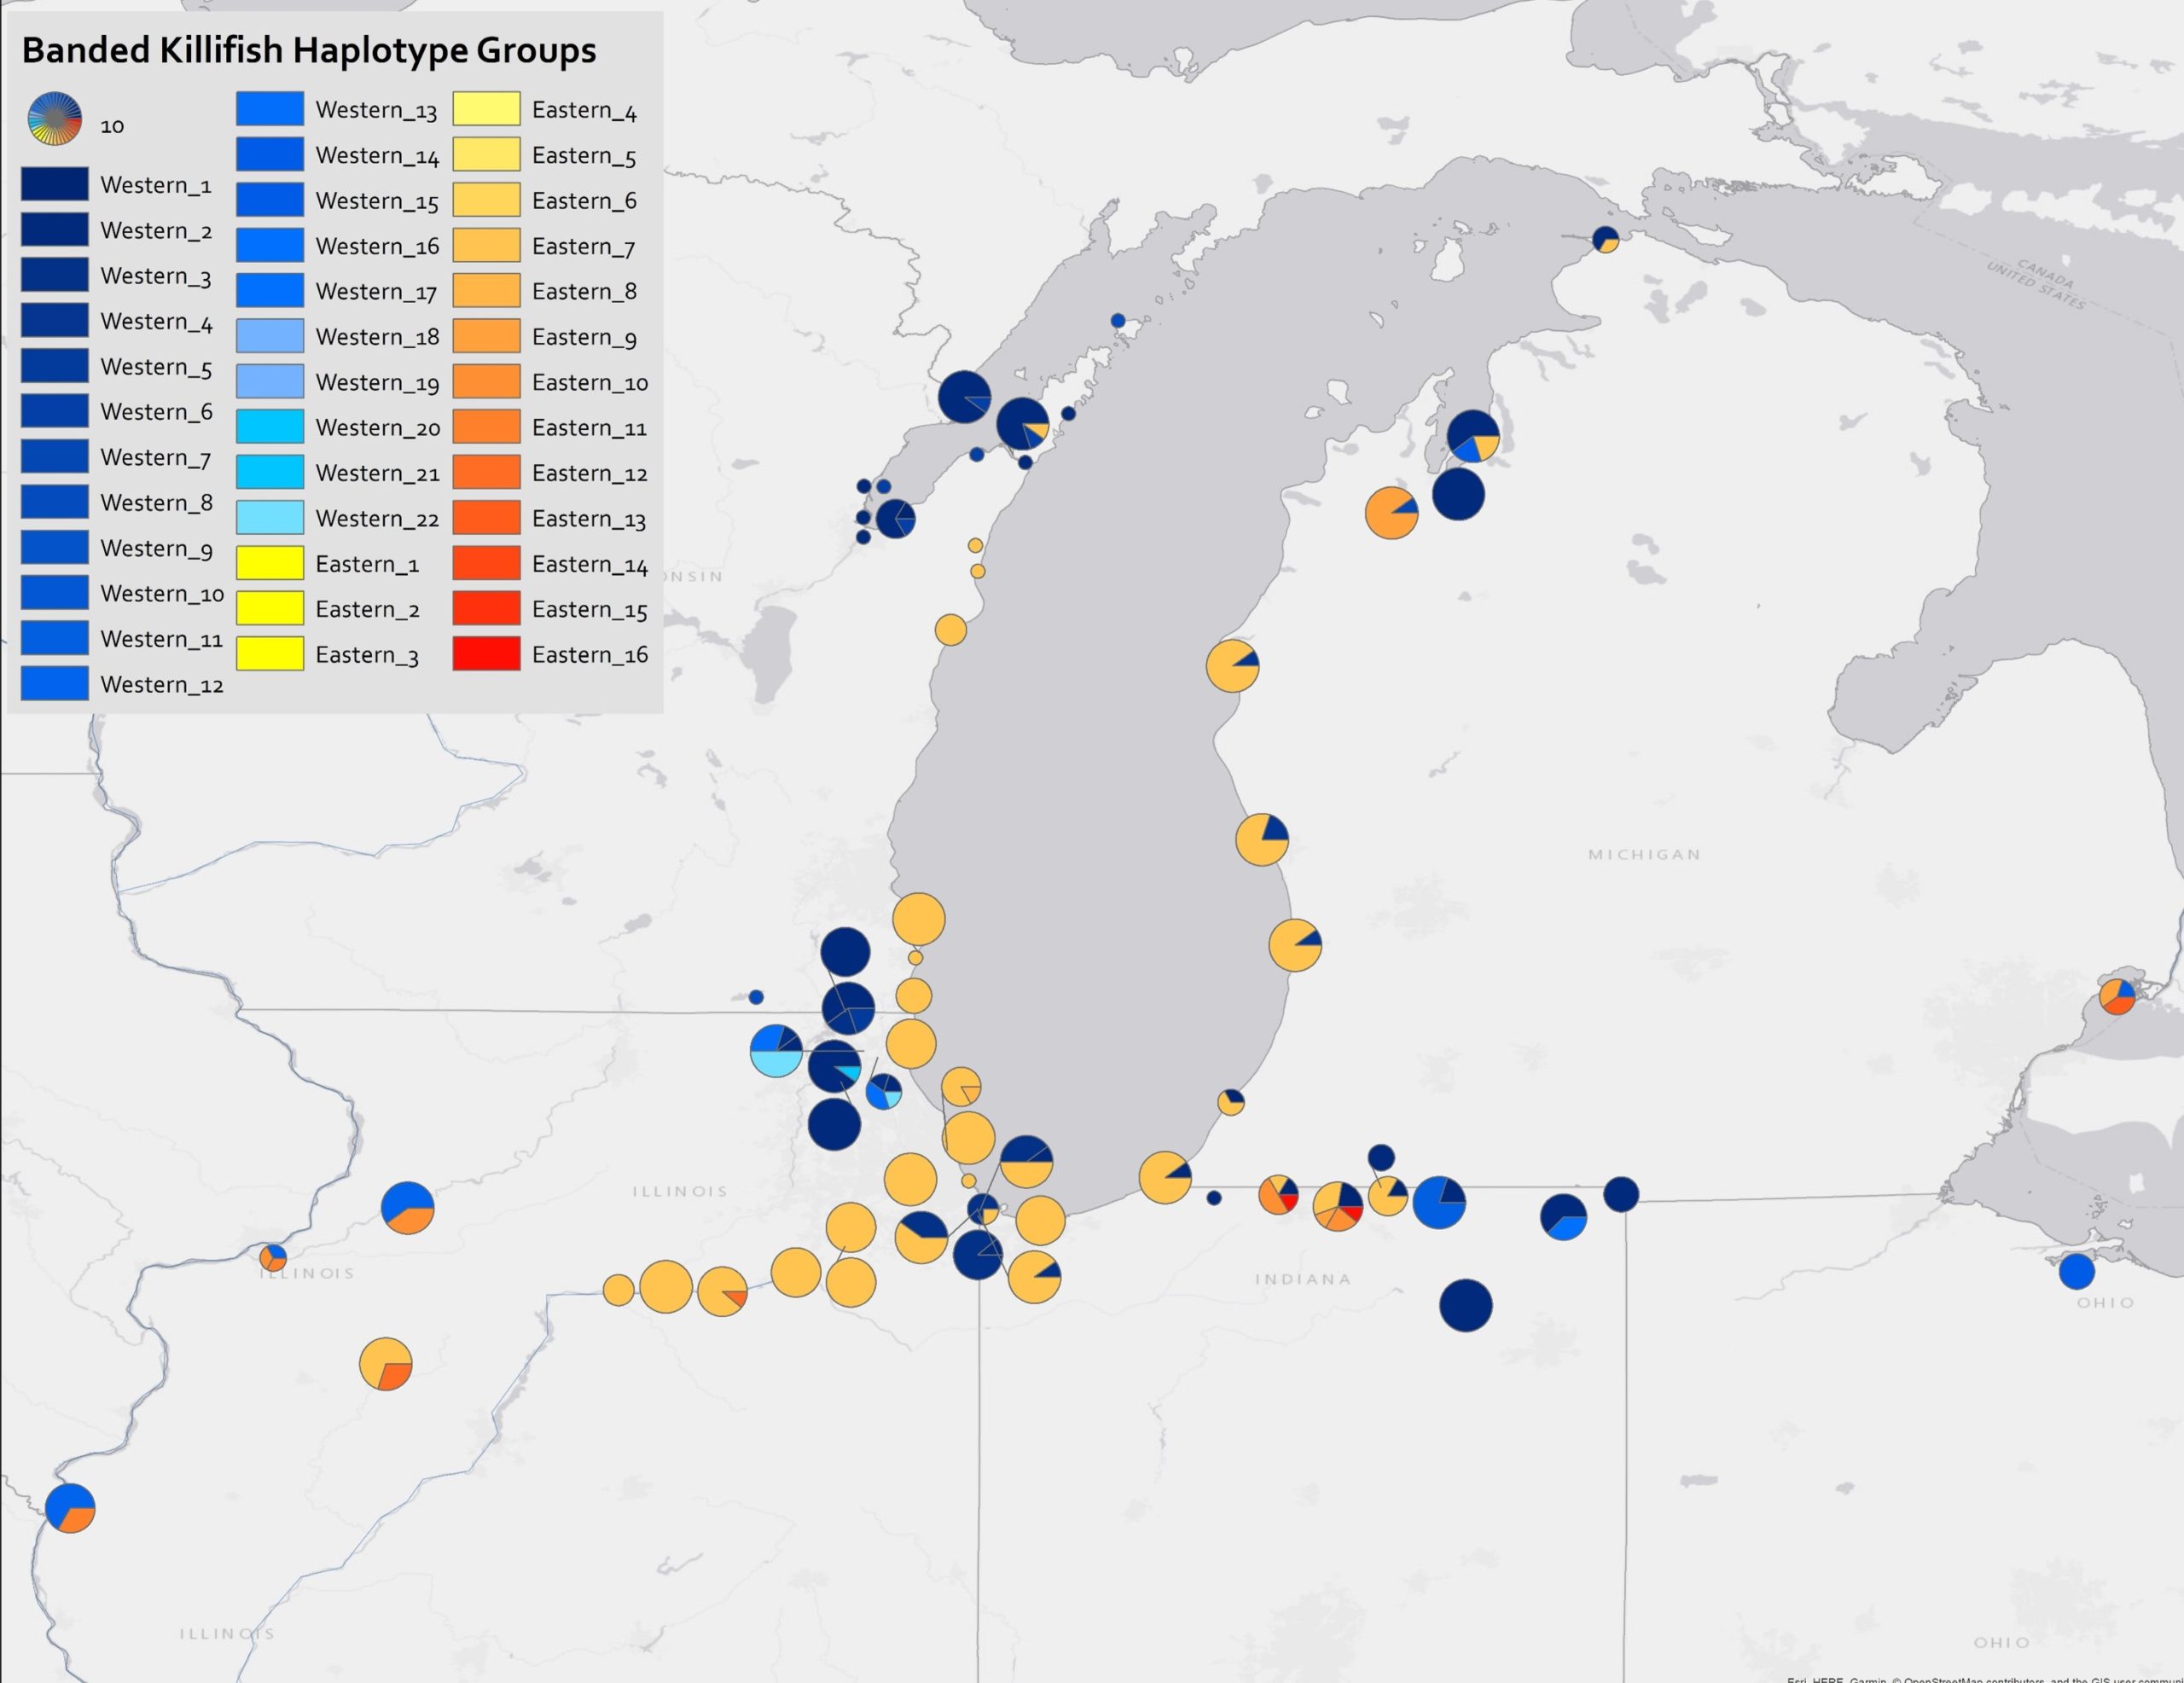 map featuring locations of eastern and western banded killifish subspecies around the Lake Michigan region